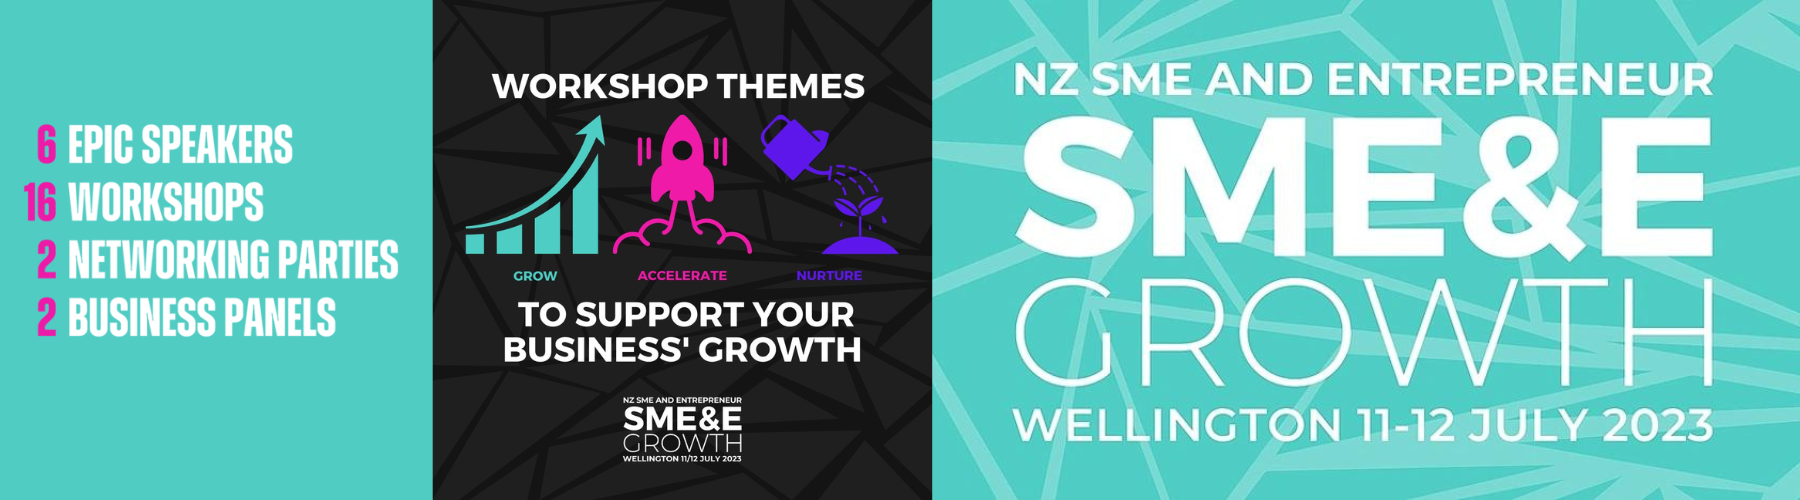 NZ SME&E Growth Event: Artificial Intelligence Business Panel